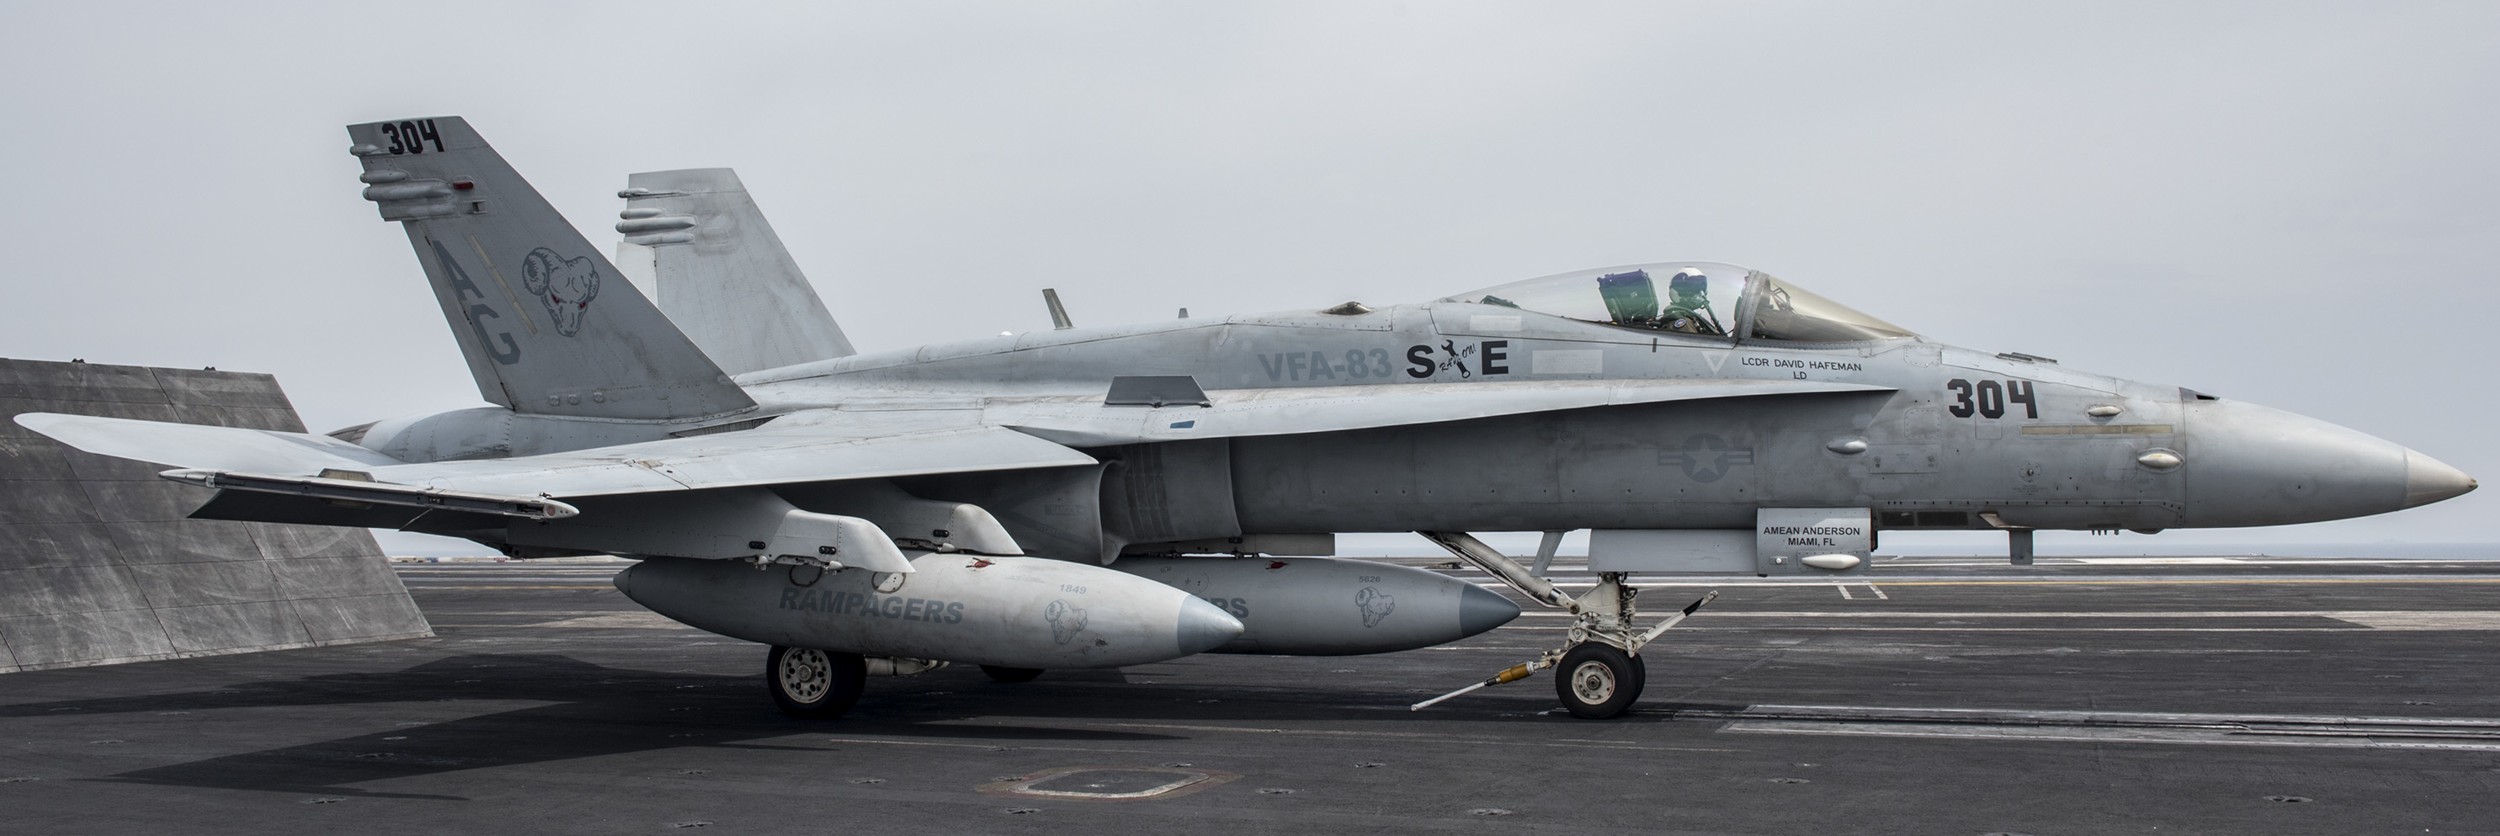 vfa-83 rampagers strike fighter squadron f/a-18c hornet cvw-7 uss harry s. truman cvn-75 37